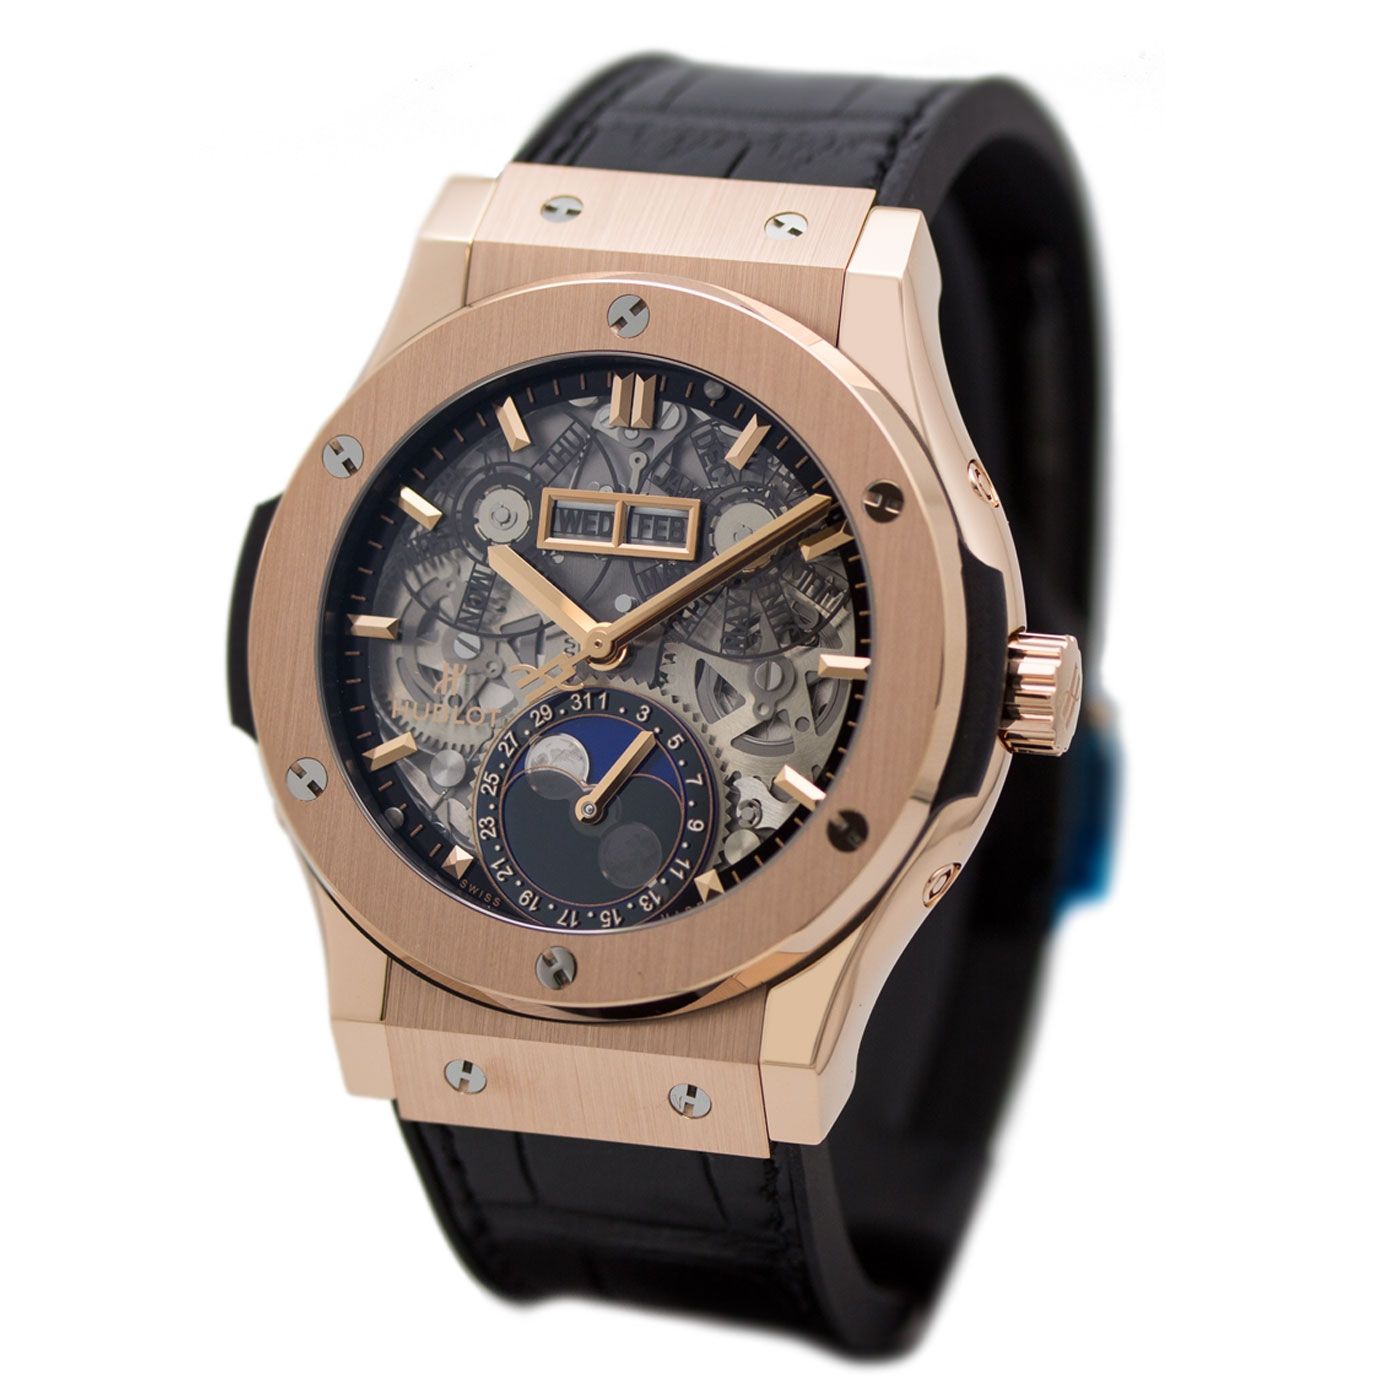 Hublot Classic Fusion Aerofusion Moonphase King Gold 42mm, Ref# 547.OX.0180.LR, Main view